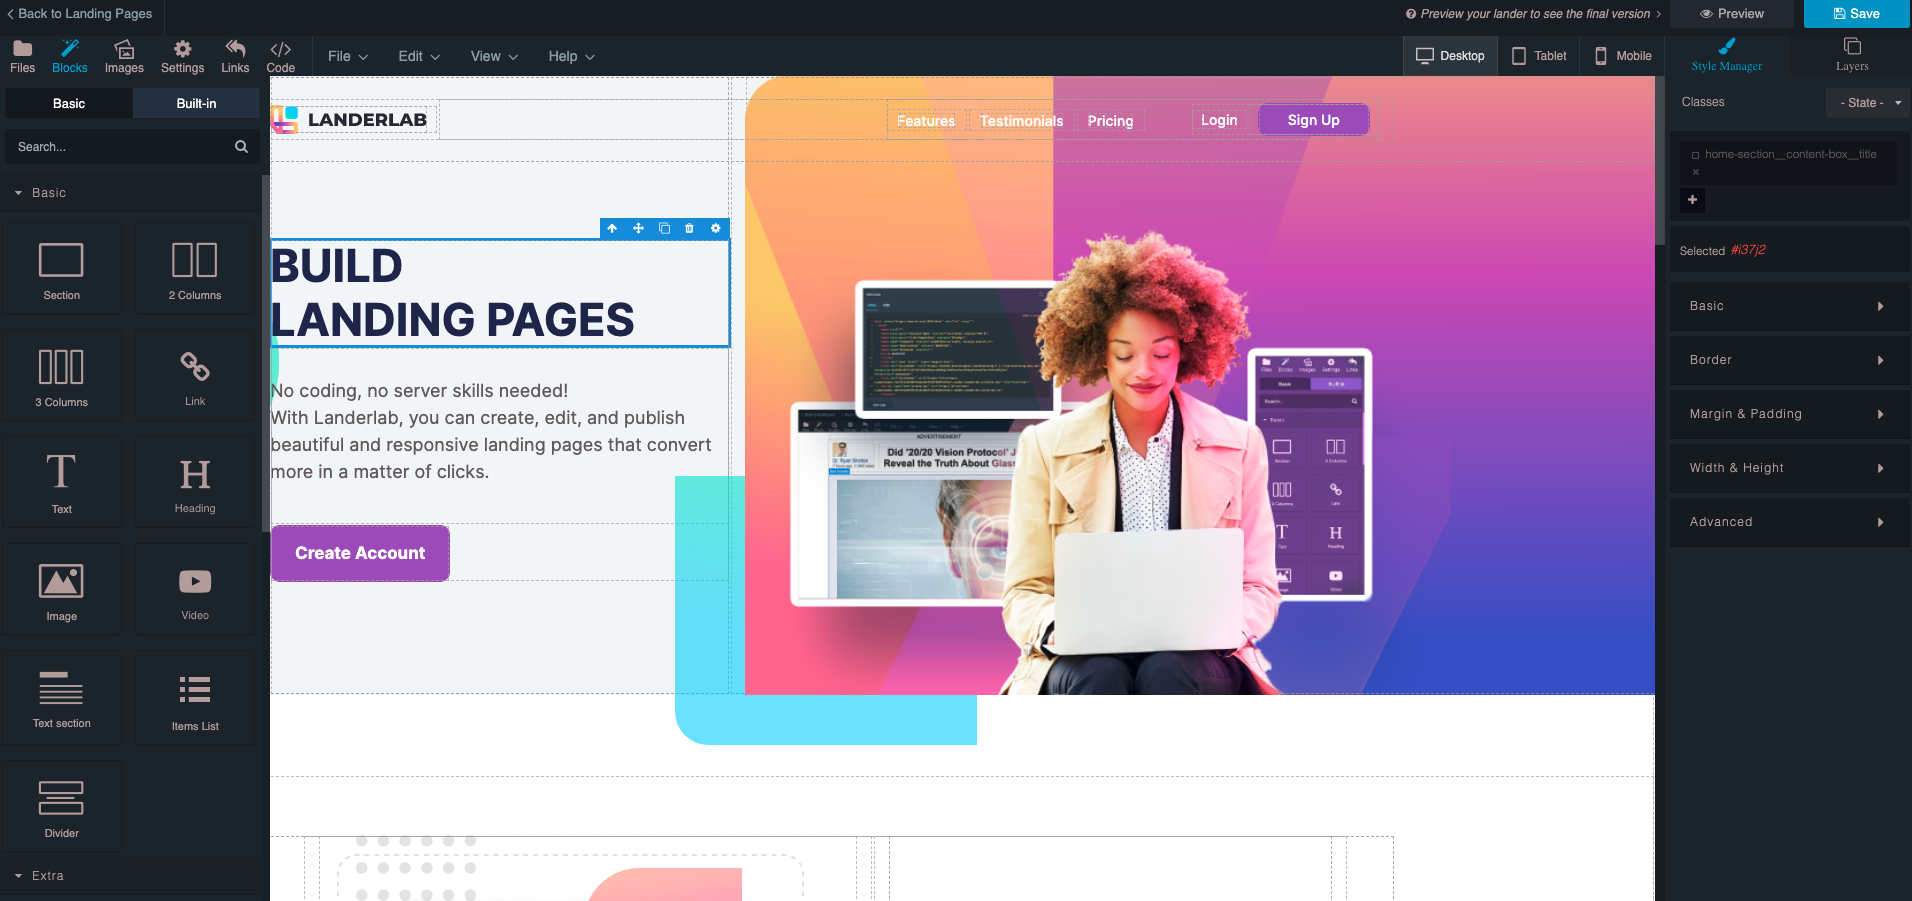 Visual Editor: From the visual editor you can edit text, images, add new blocks, or change the style of your landing page.